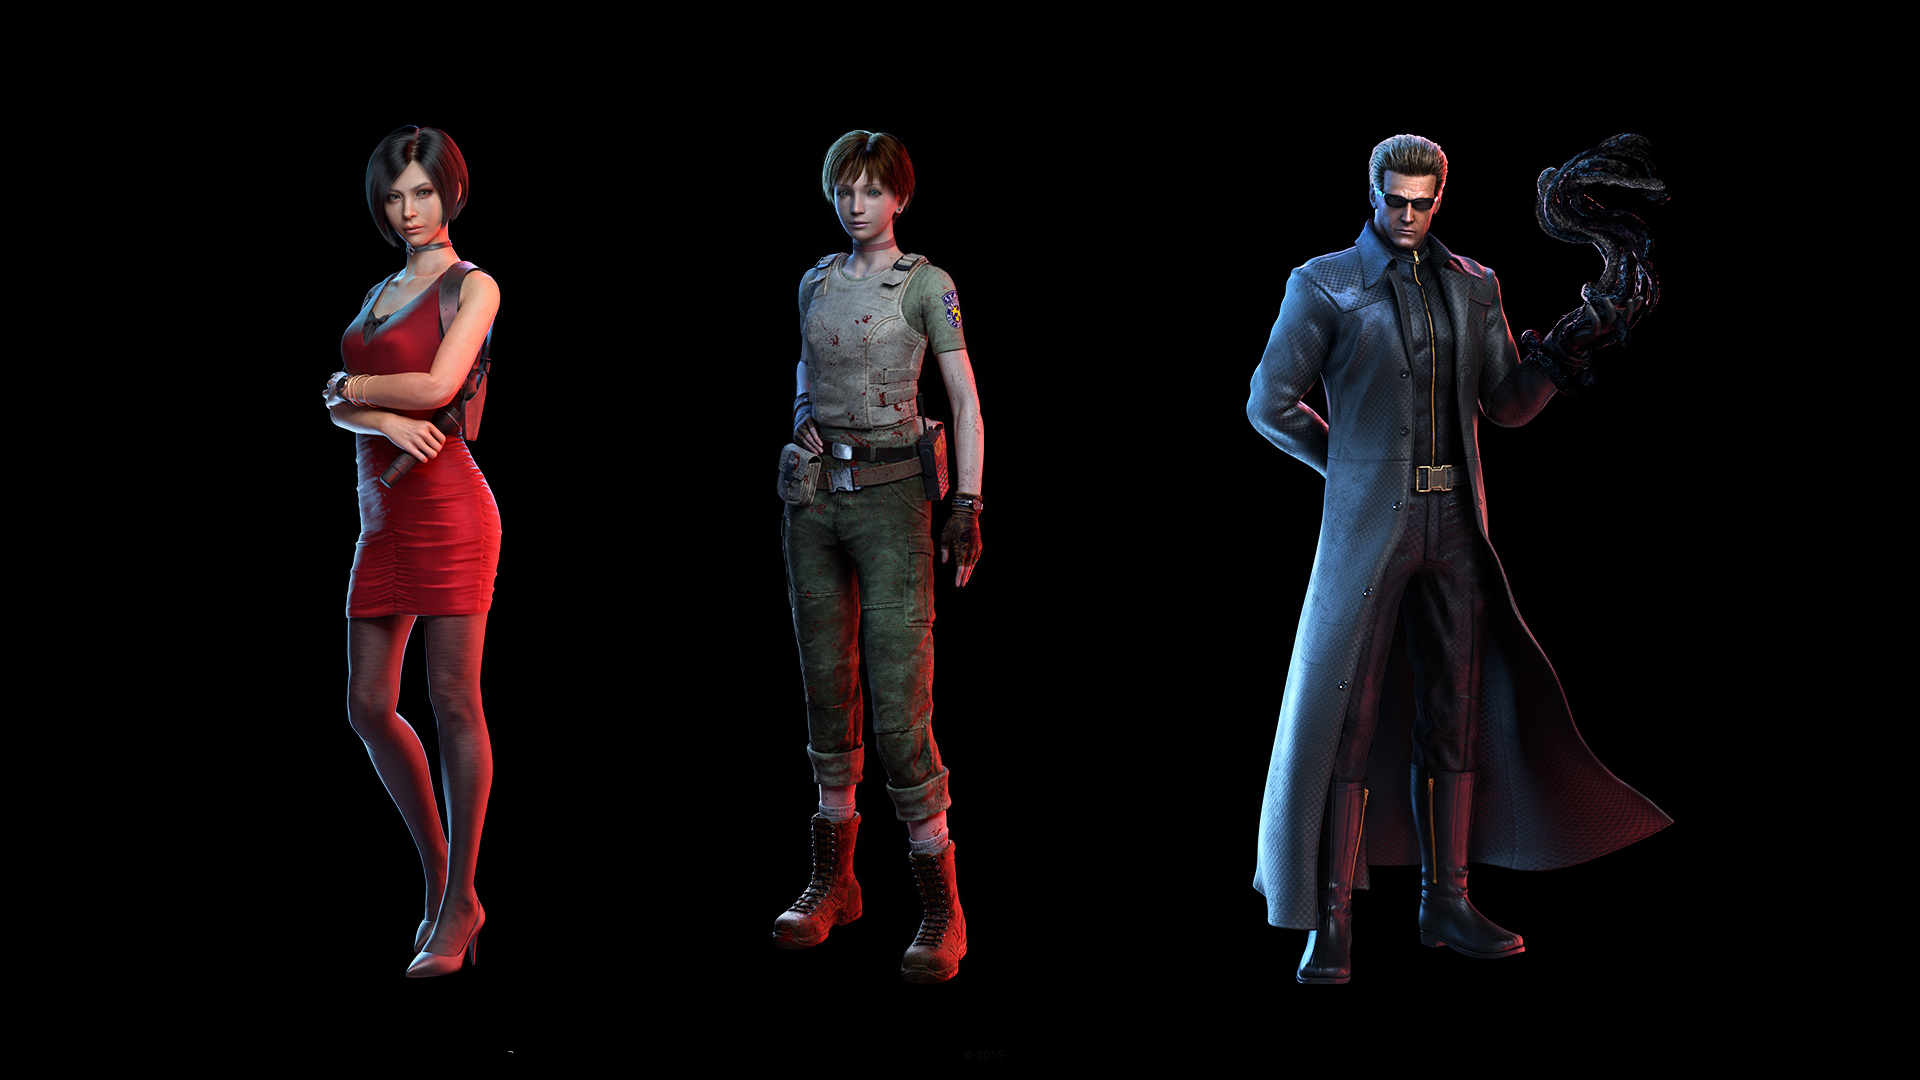 Dead by Daylight - Rebecca Chambers, Ada Wong, and Albert Wesker from the Resident Evil franchise